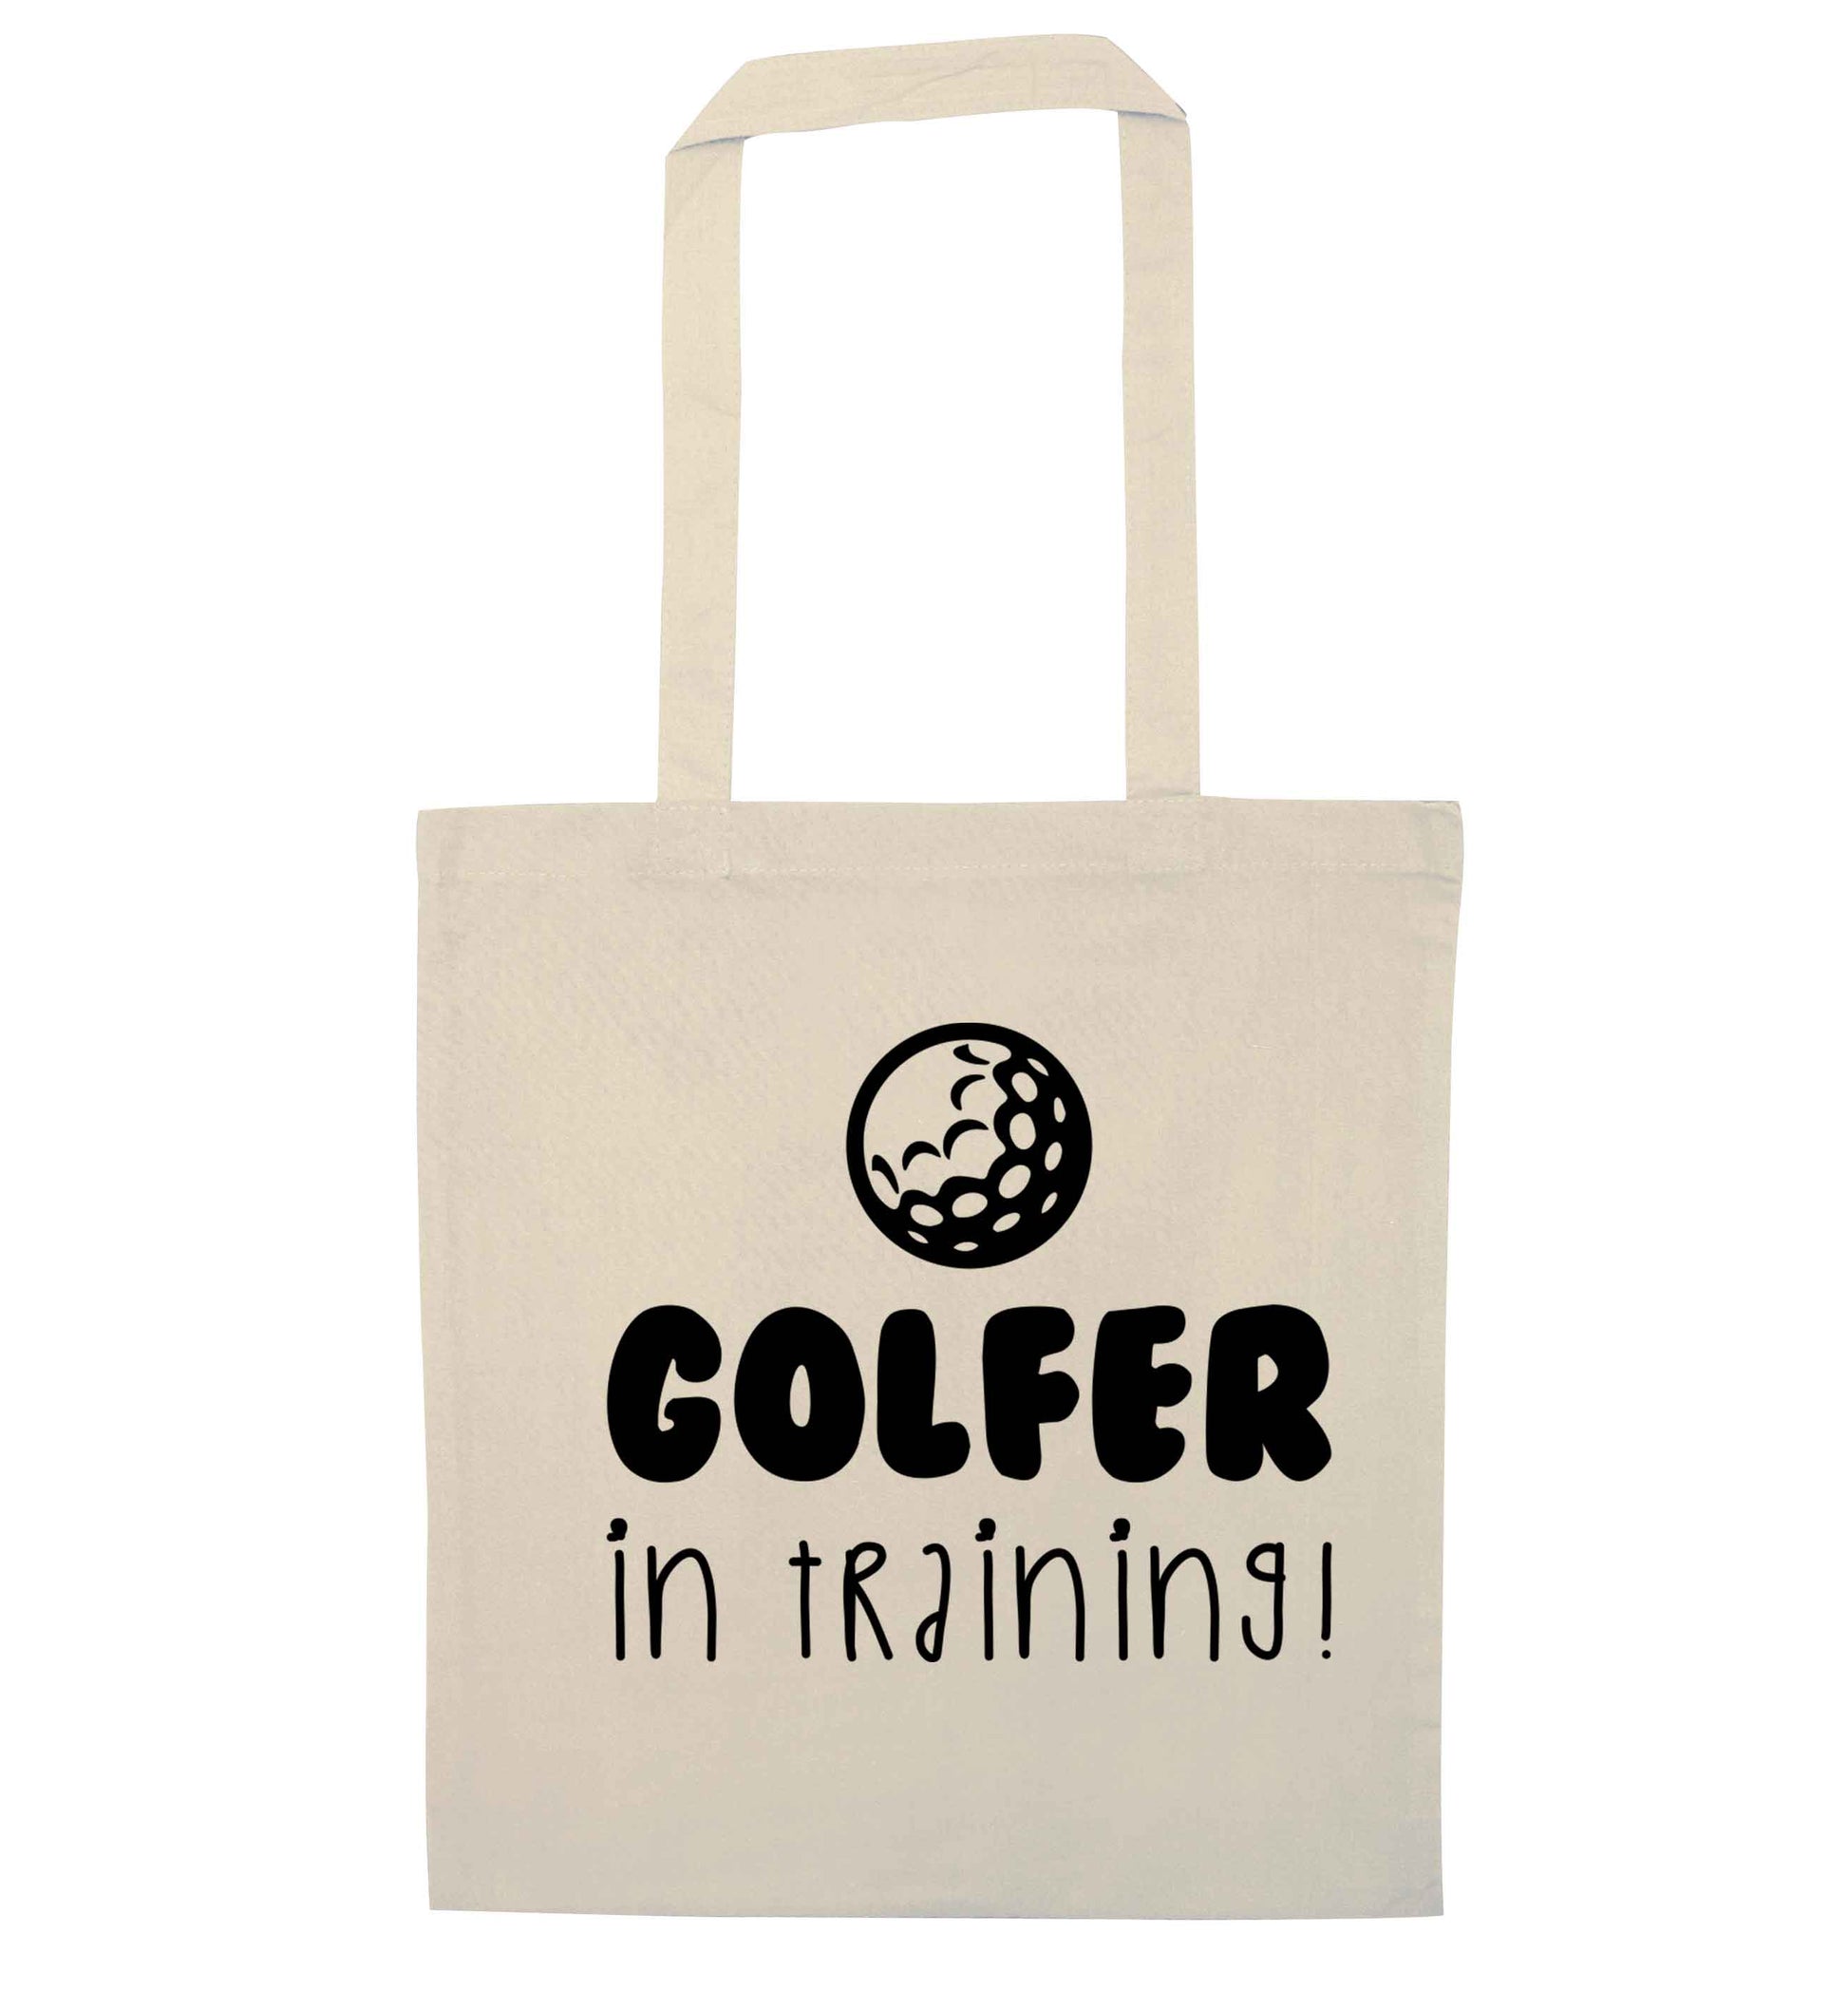 Golfer in training natural tote bag